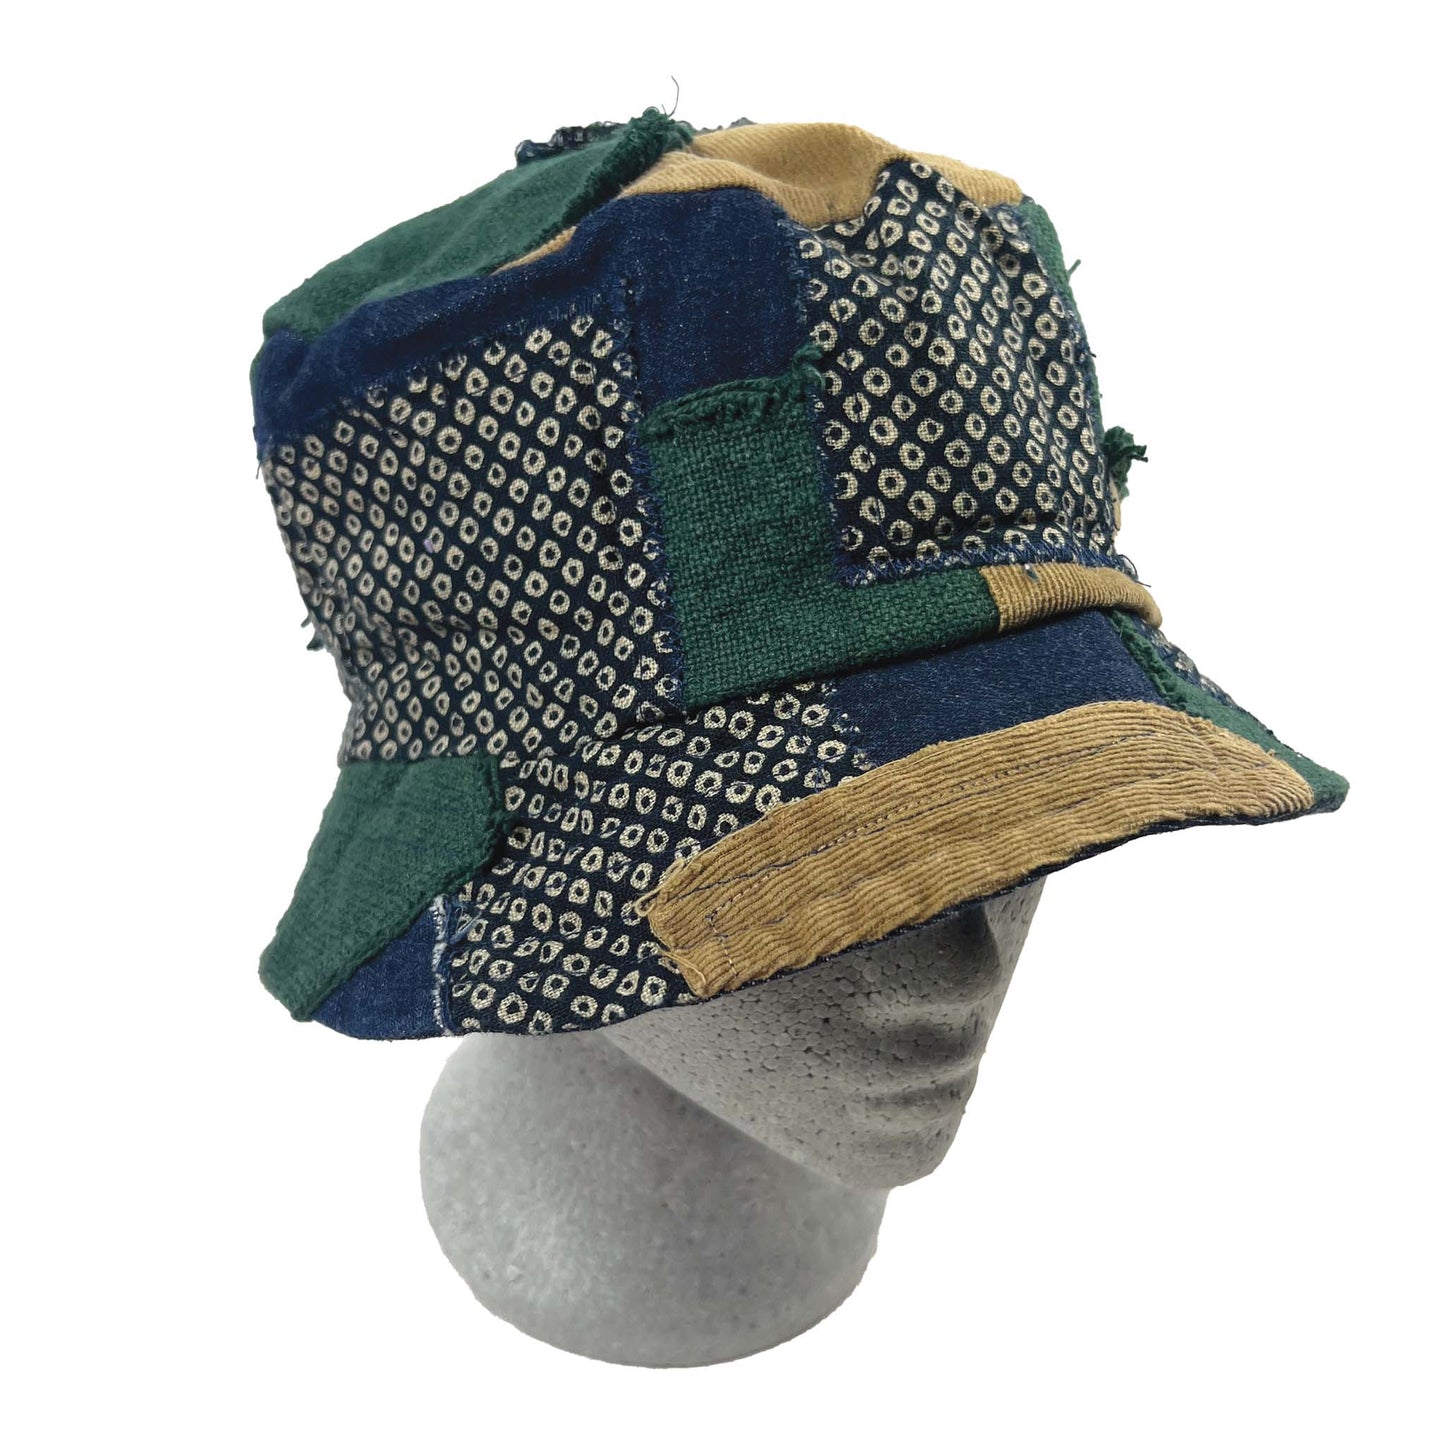 Patched Extra Big Bucket Hat Navy/Green/Tan/Japanese pattern